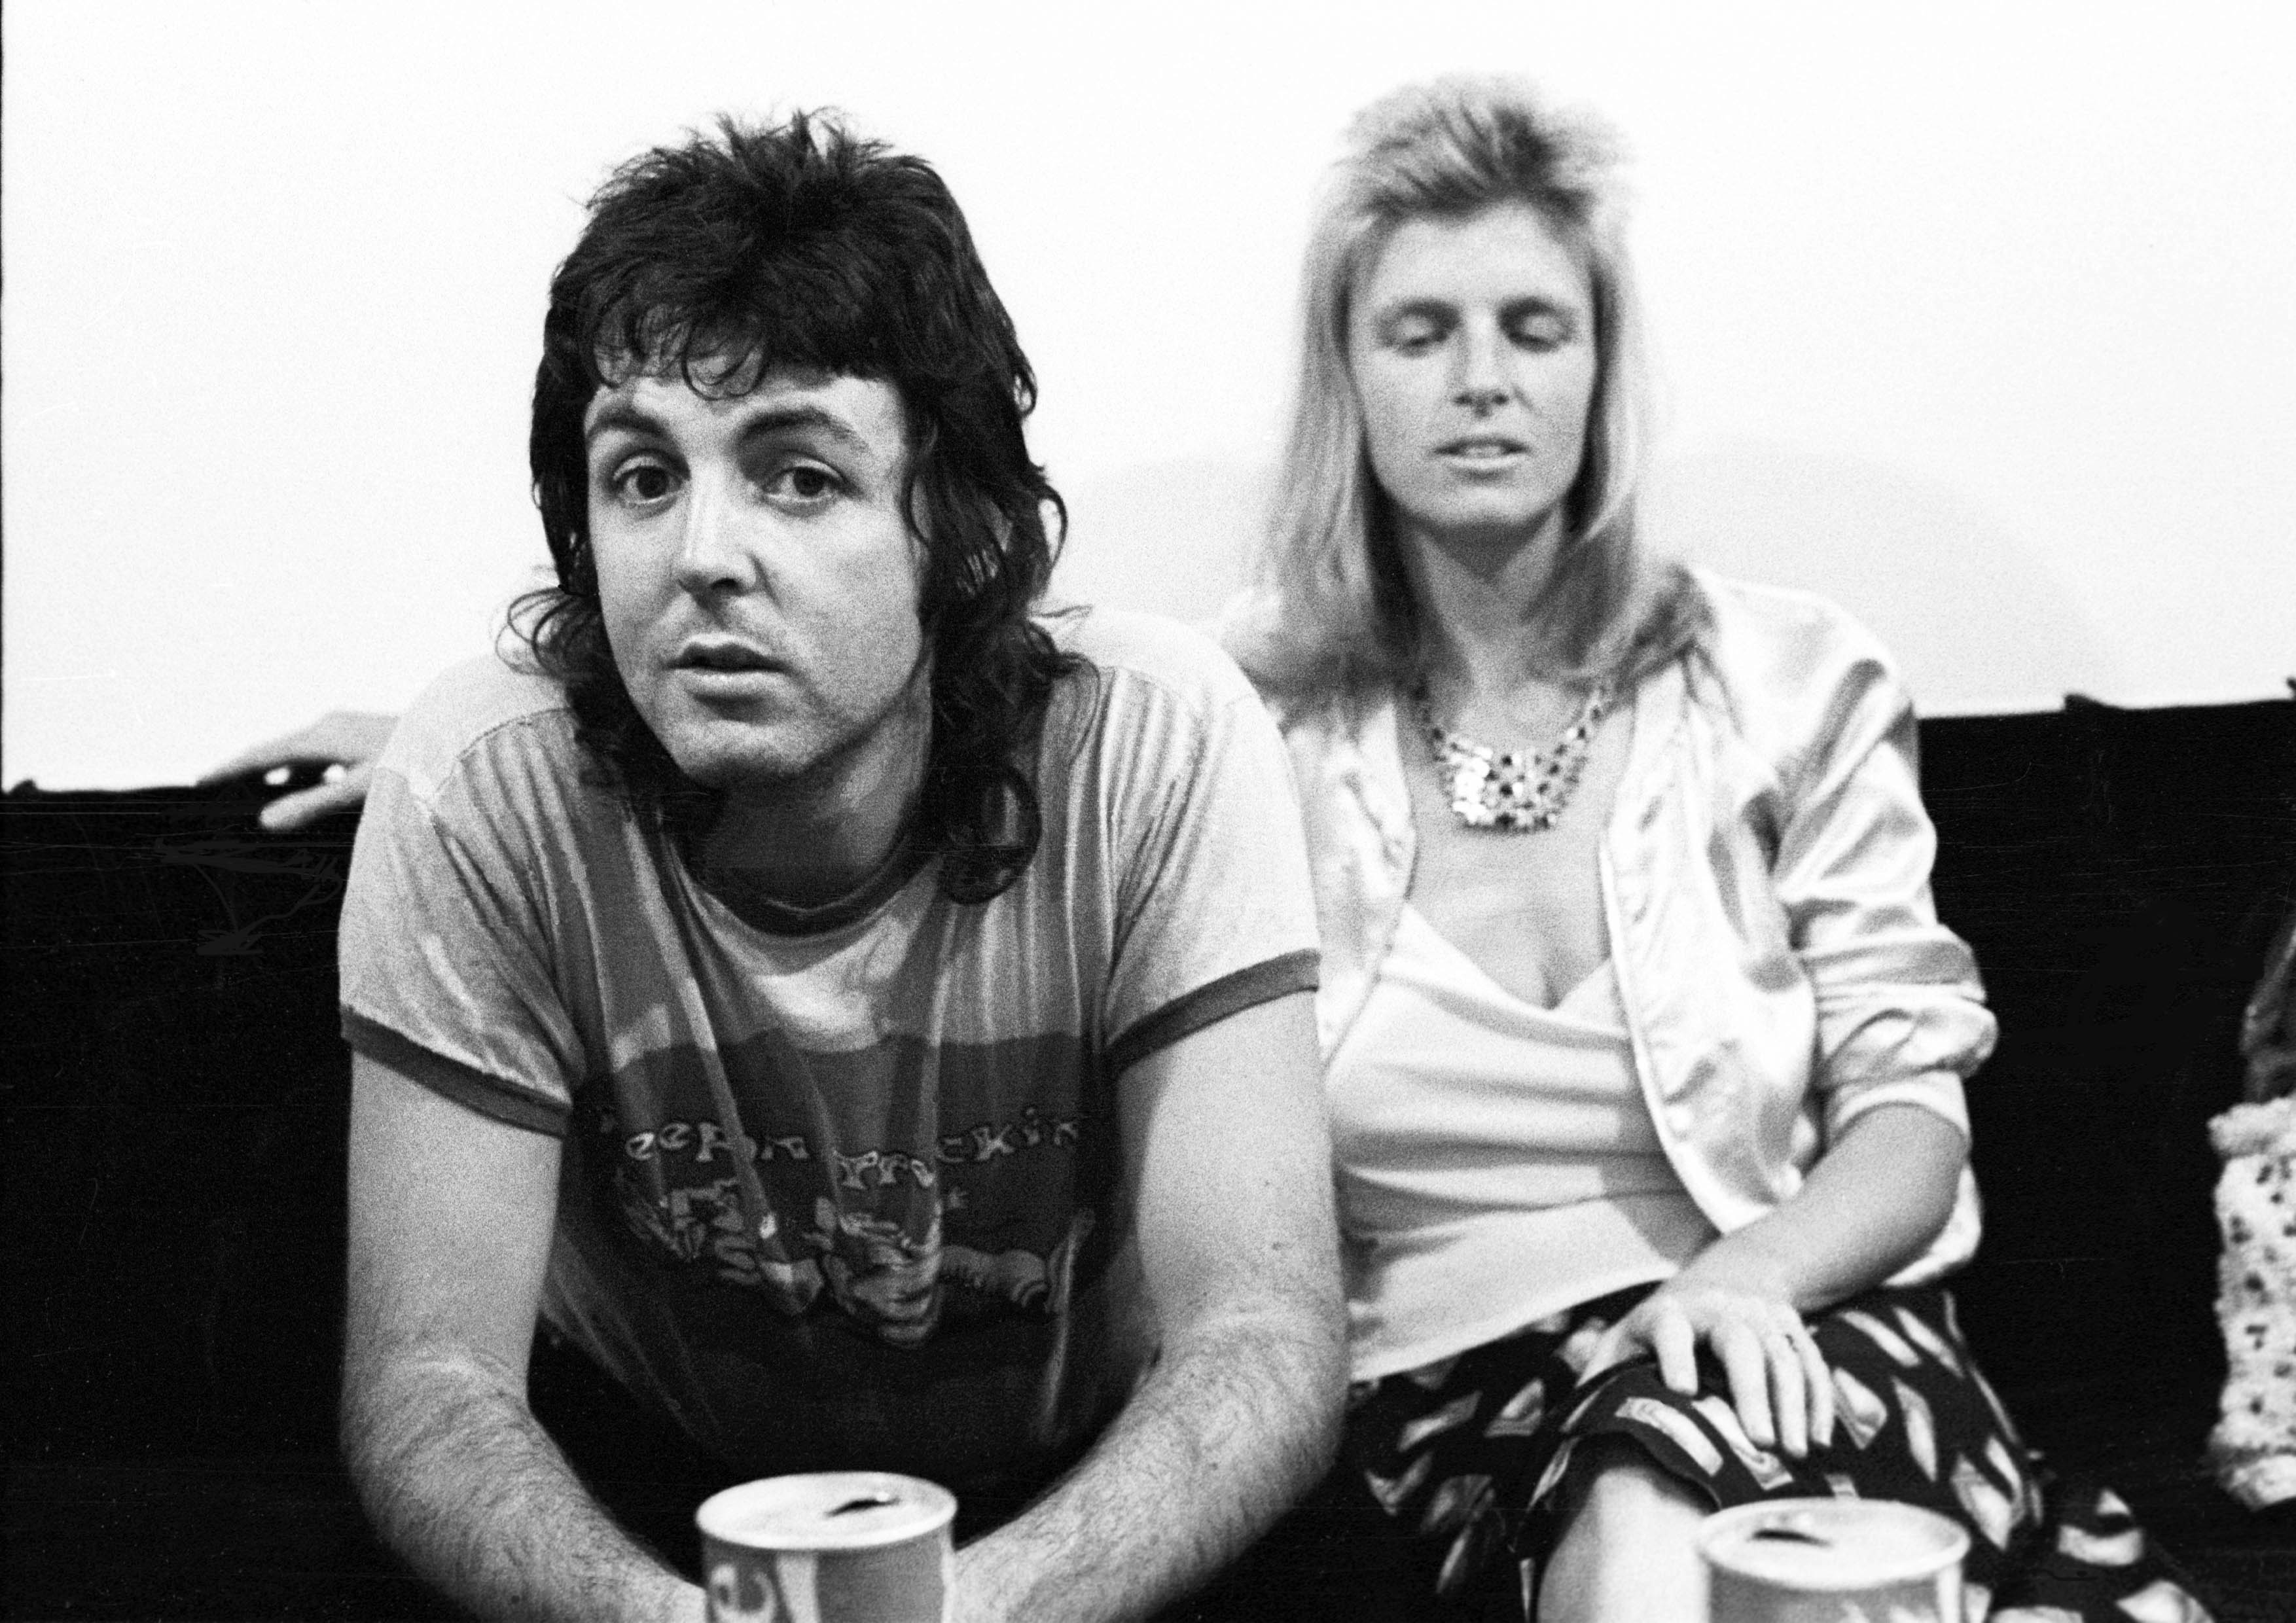 Paul McCartney and wife Linda McCartney from wings backstage at Newcastle City Hall in England